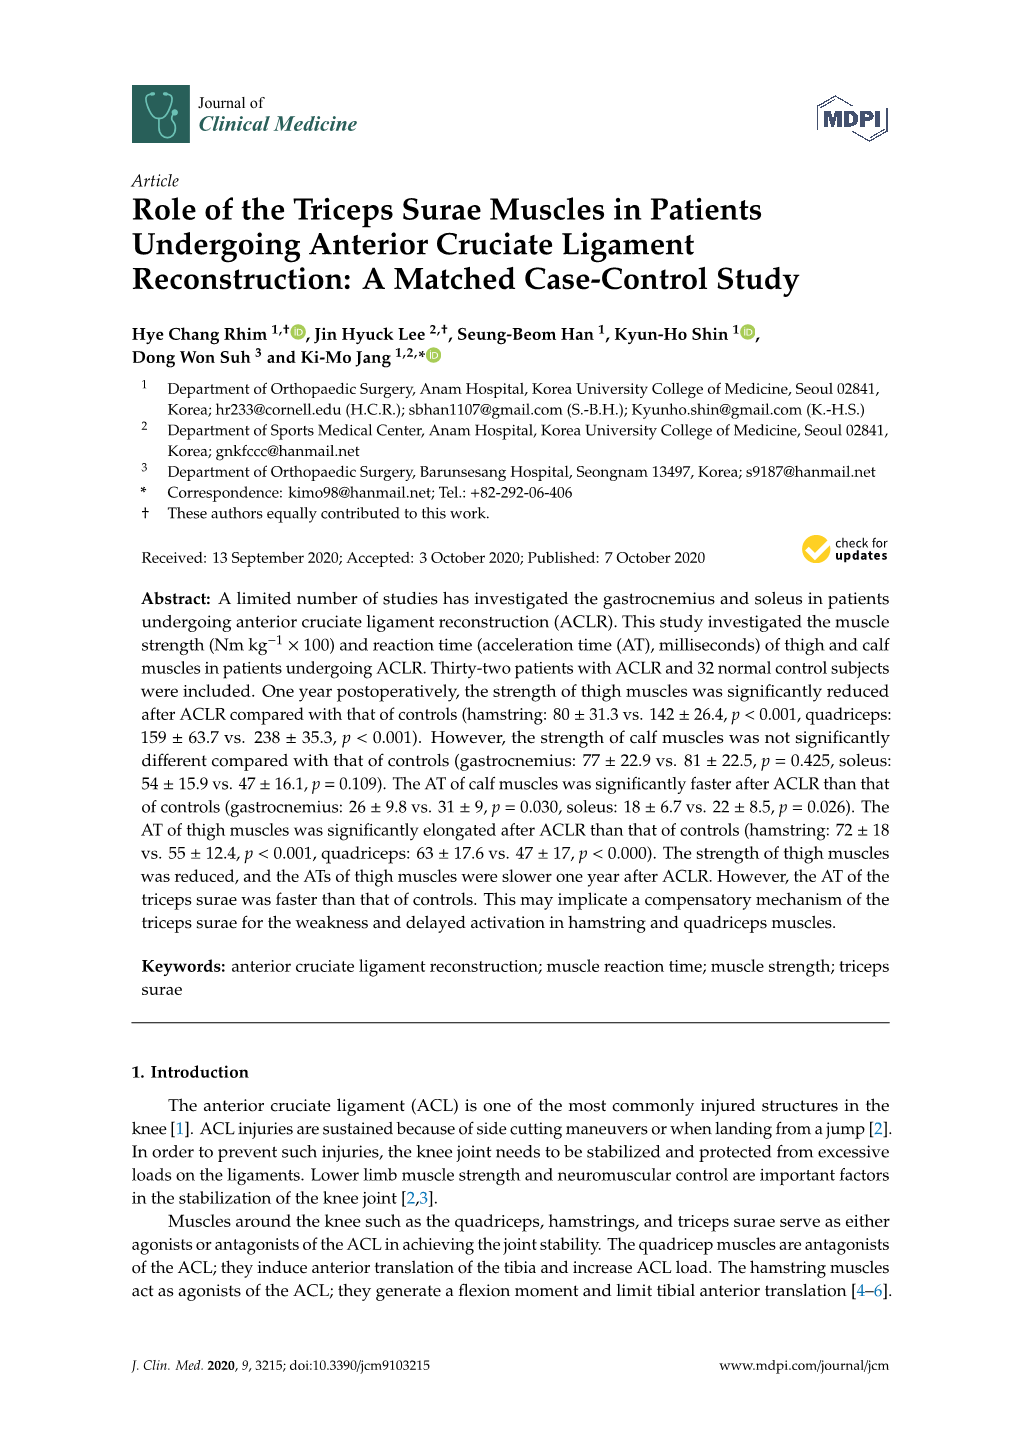 Role of the Triceps Surae Muscles in Patients Undergoing Anterior Cruciate Ligament Reconstruction: a Matched Case-Control Study